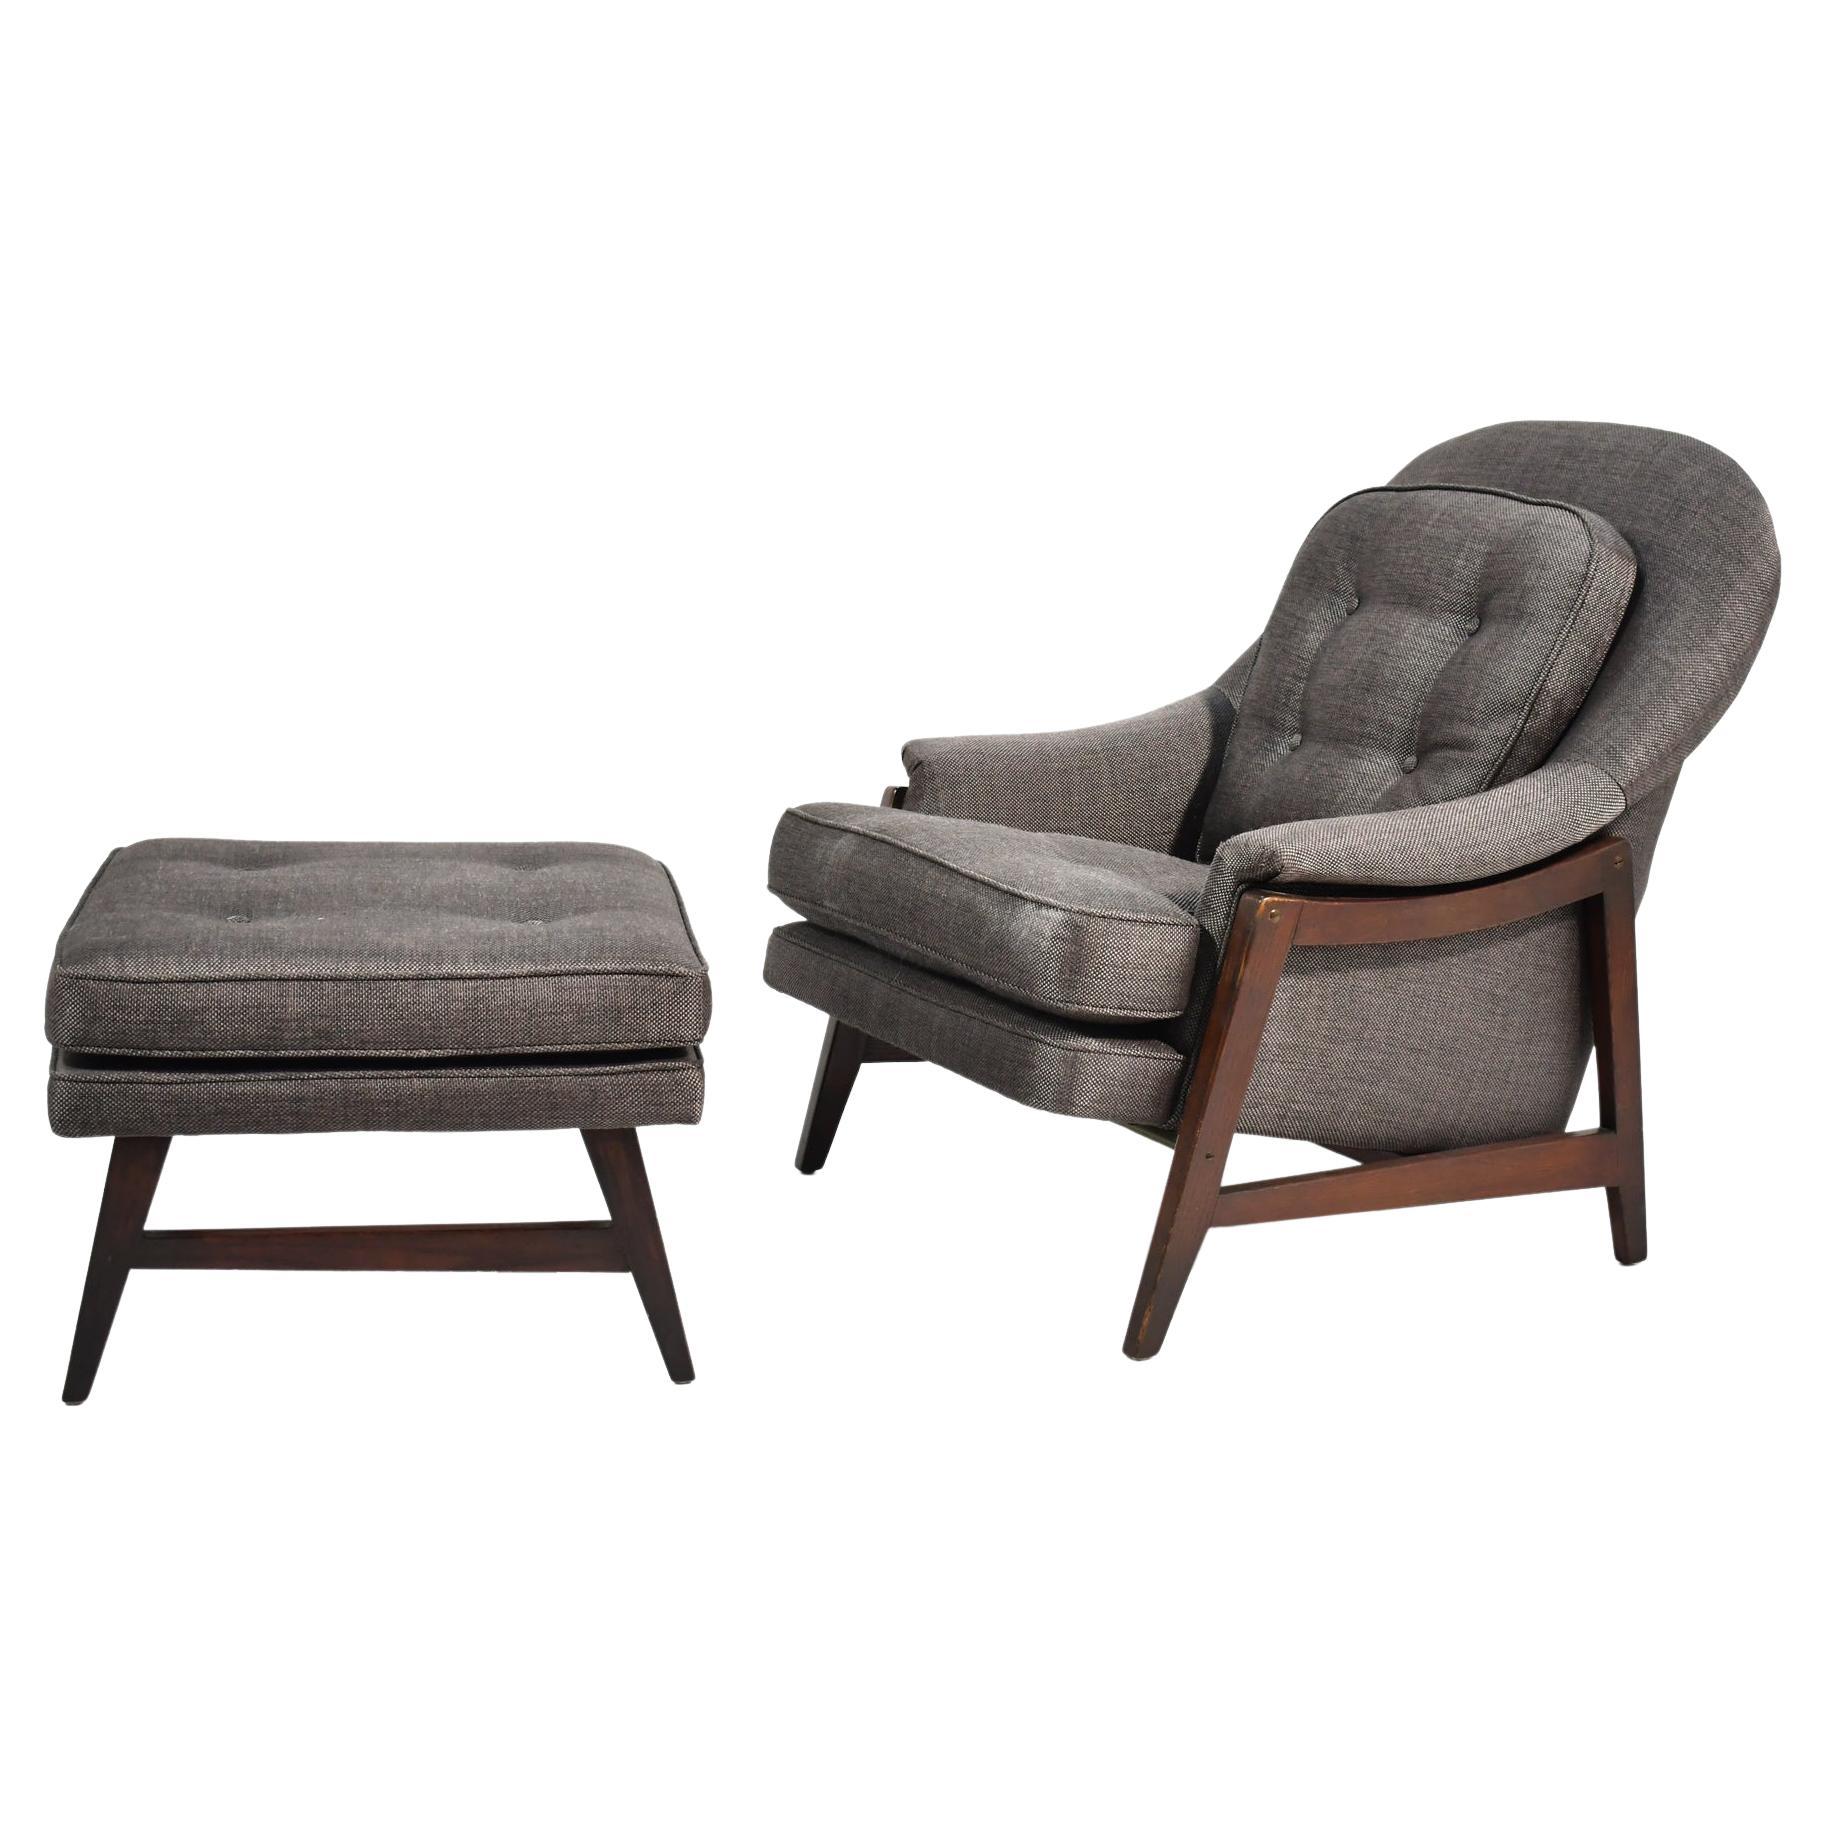 Edward Wormley Model 5701 Lounge Chair & Ottoman For Sale